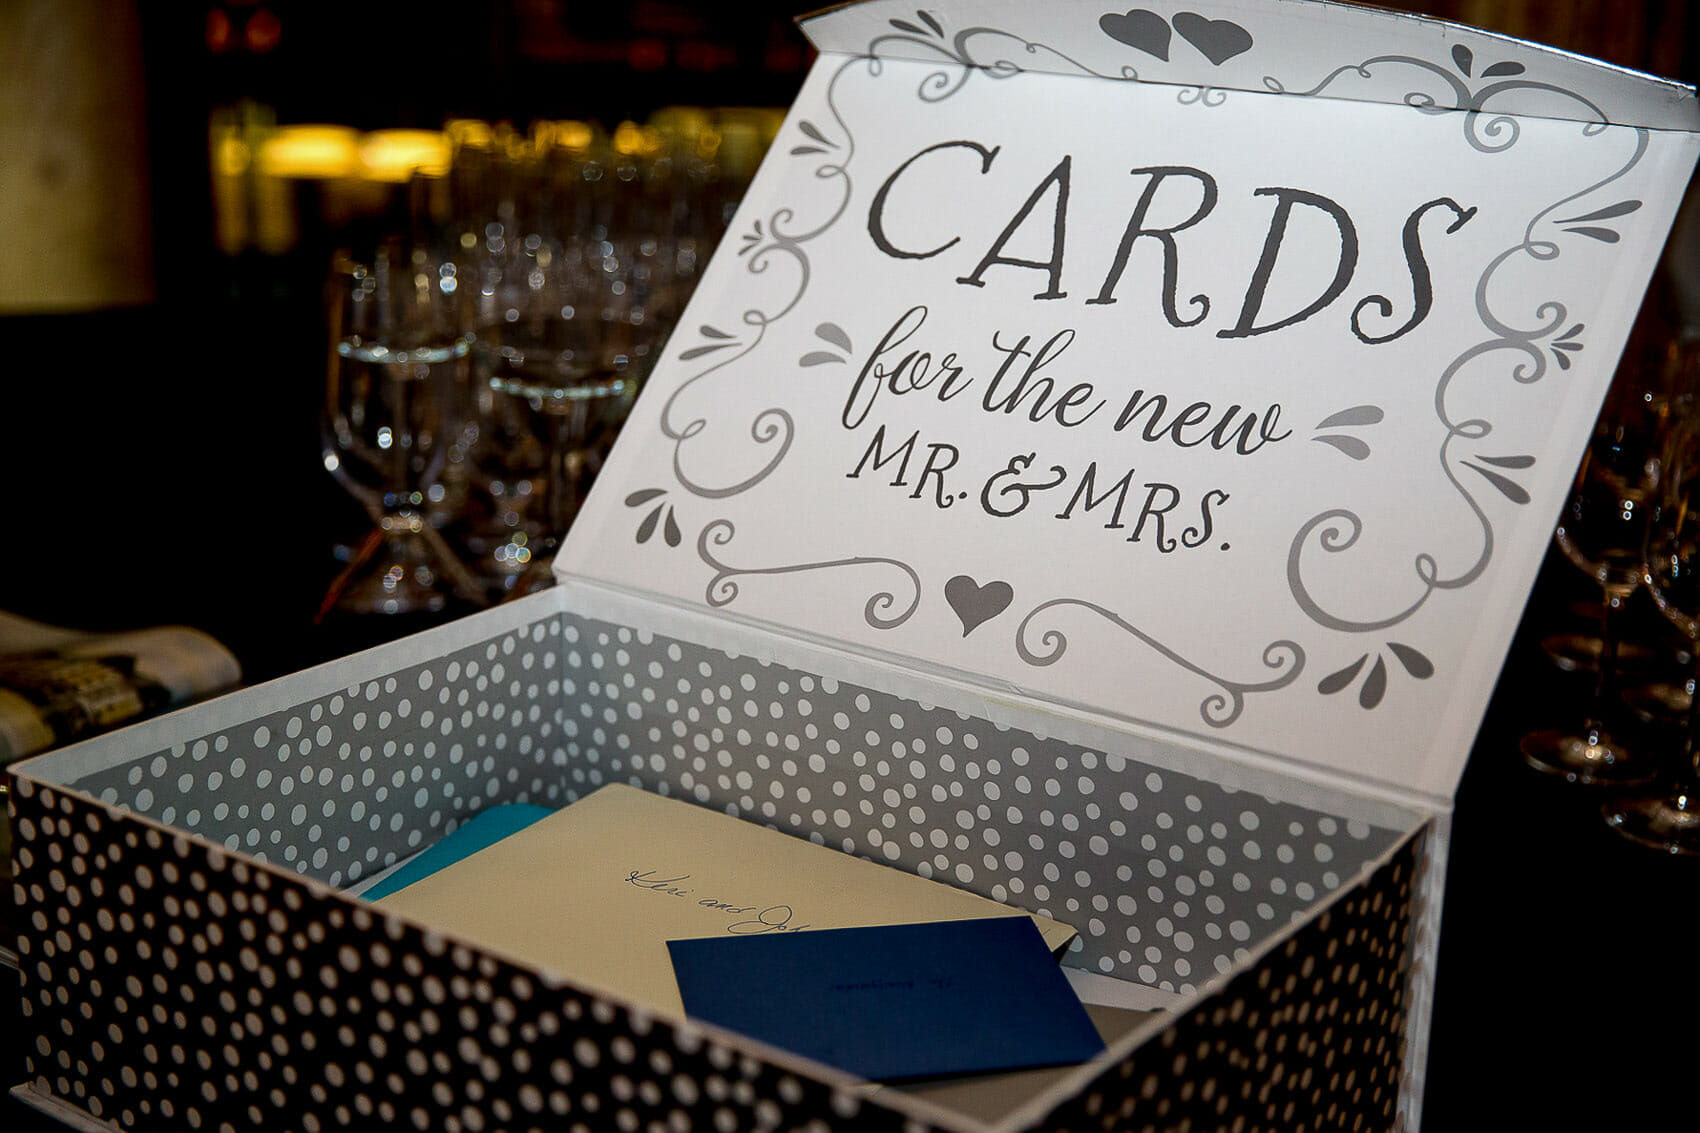 Cards box for the new Mr. & Mrs.